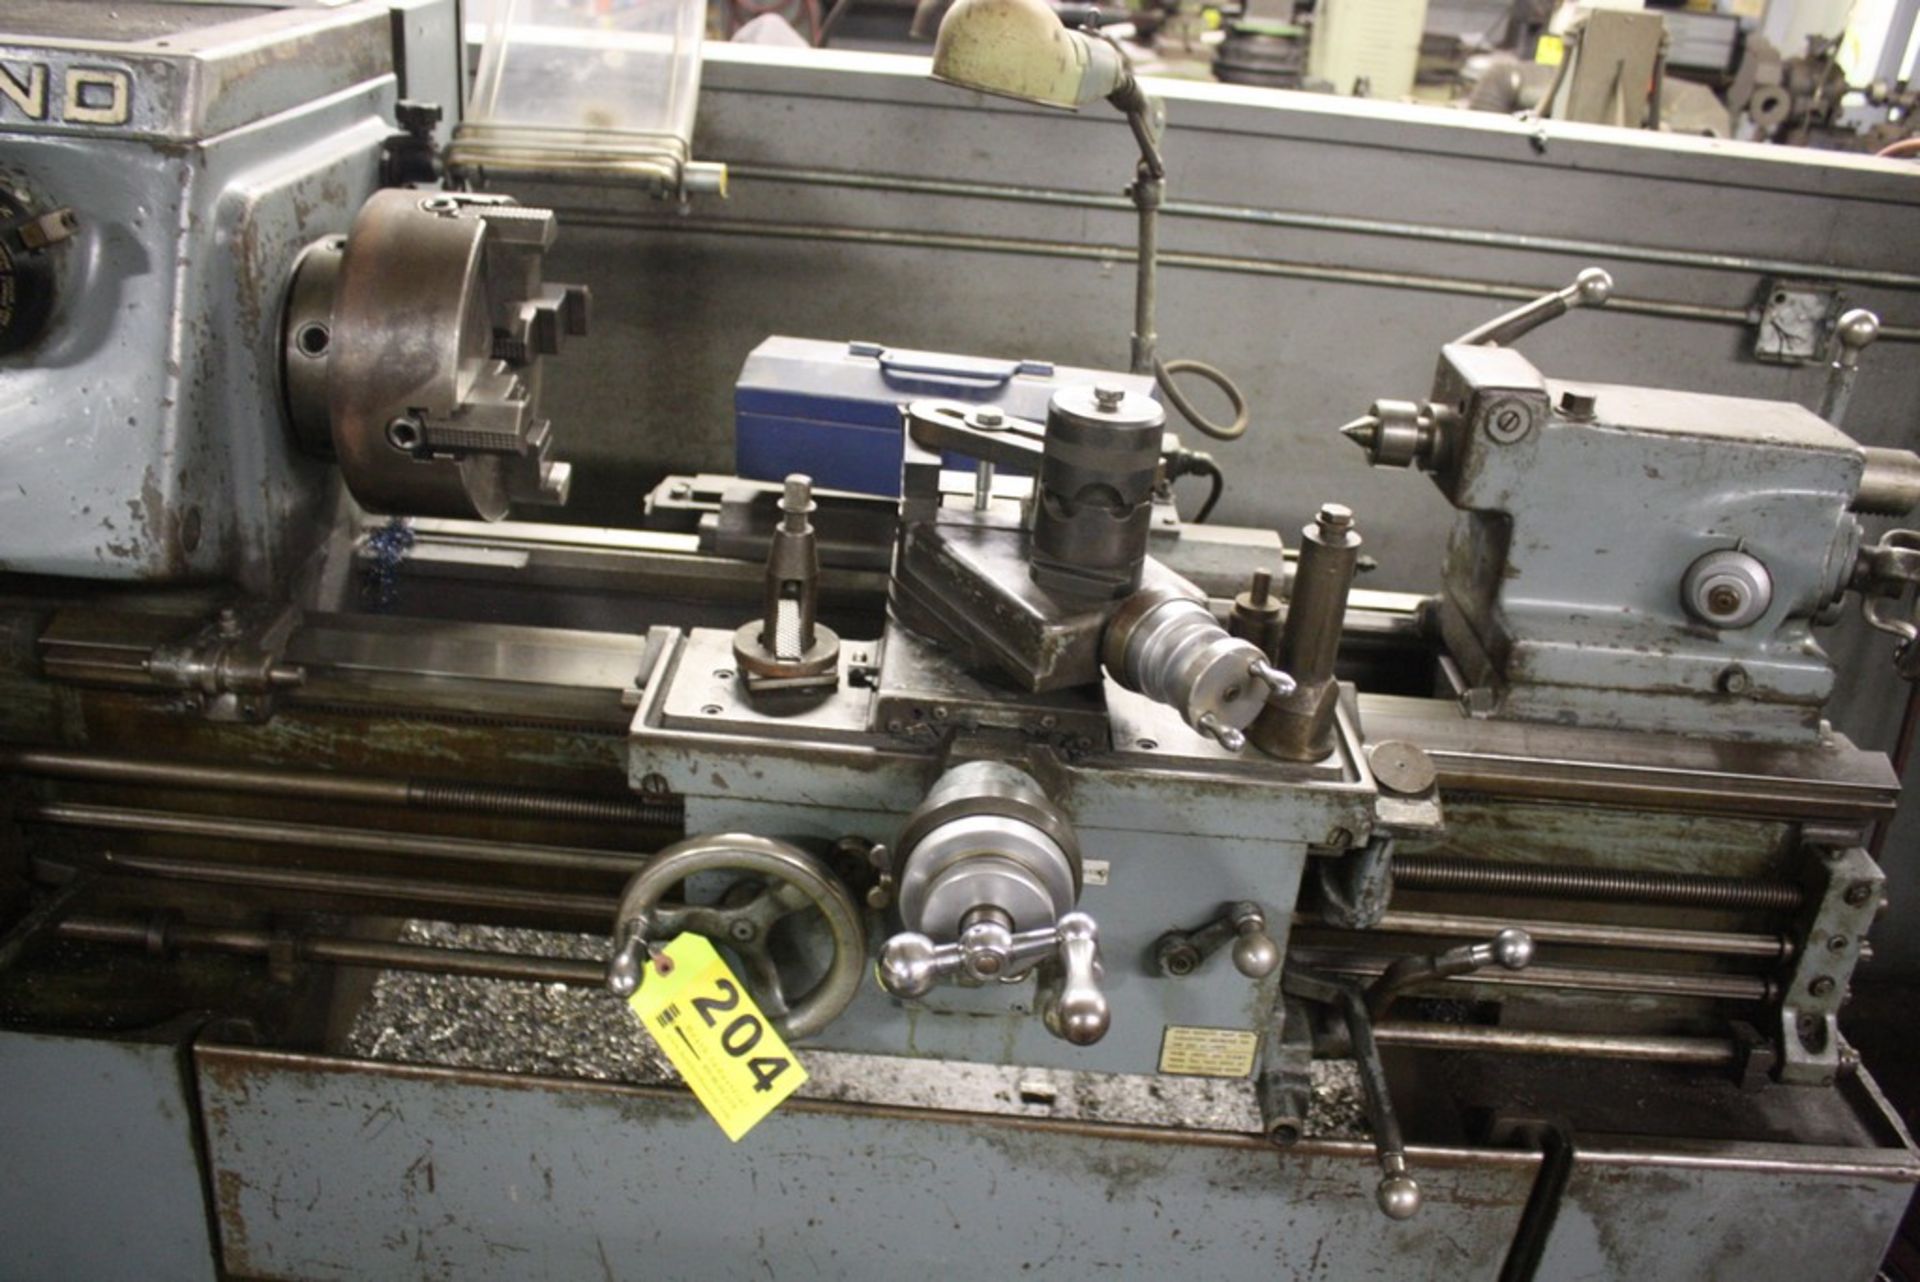 LEBLOND 15" X36" MODEL TOOL & DIE MAKERS LATHE, S/N 6HC-277, 10" 4-JAW CHUCK, 2400 RPM SPINDLE, - Image 3 of 4